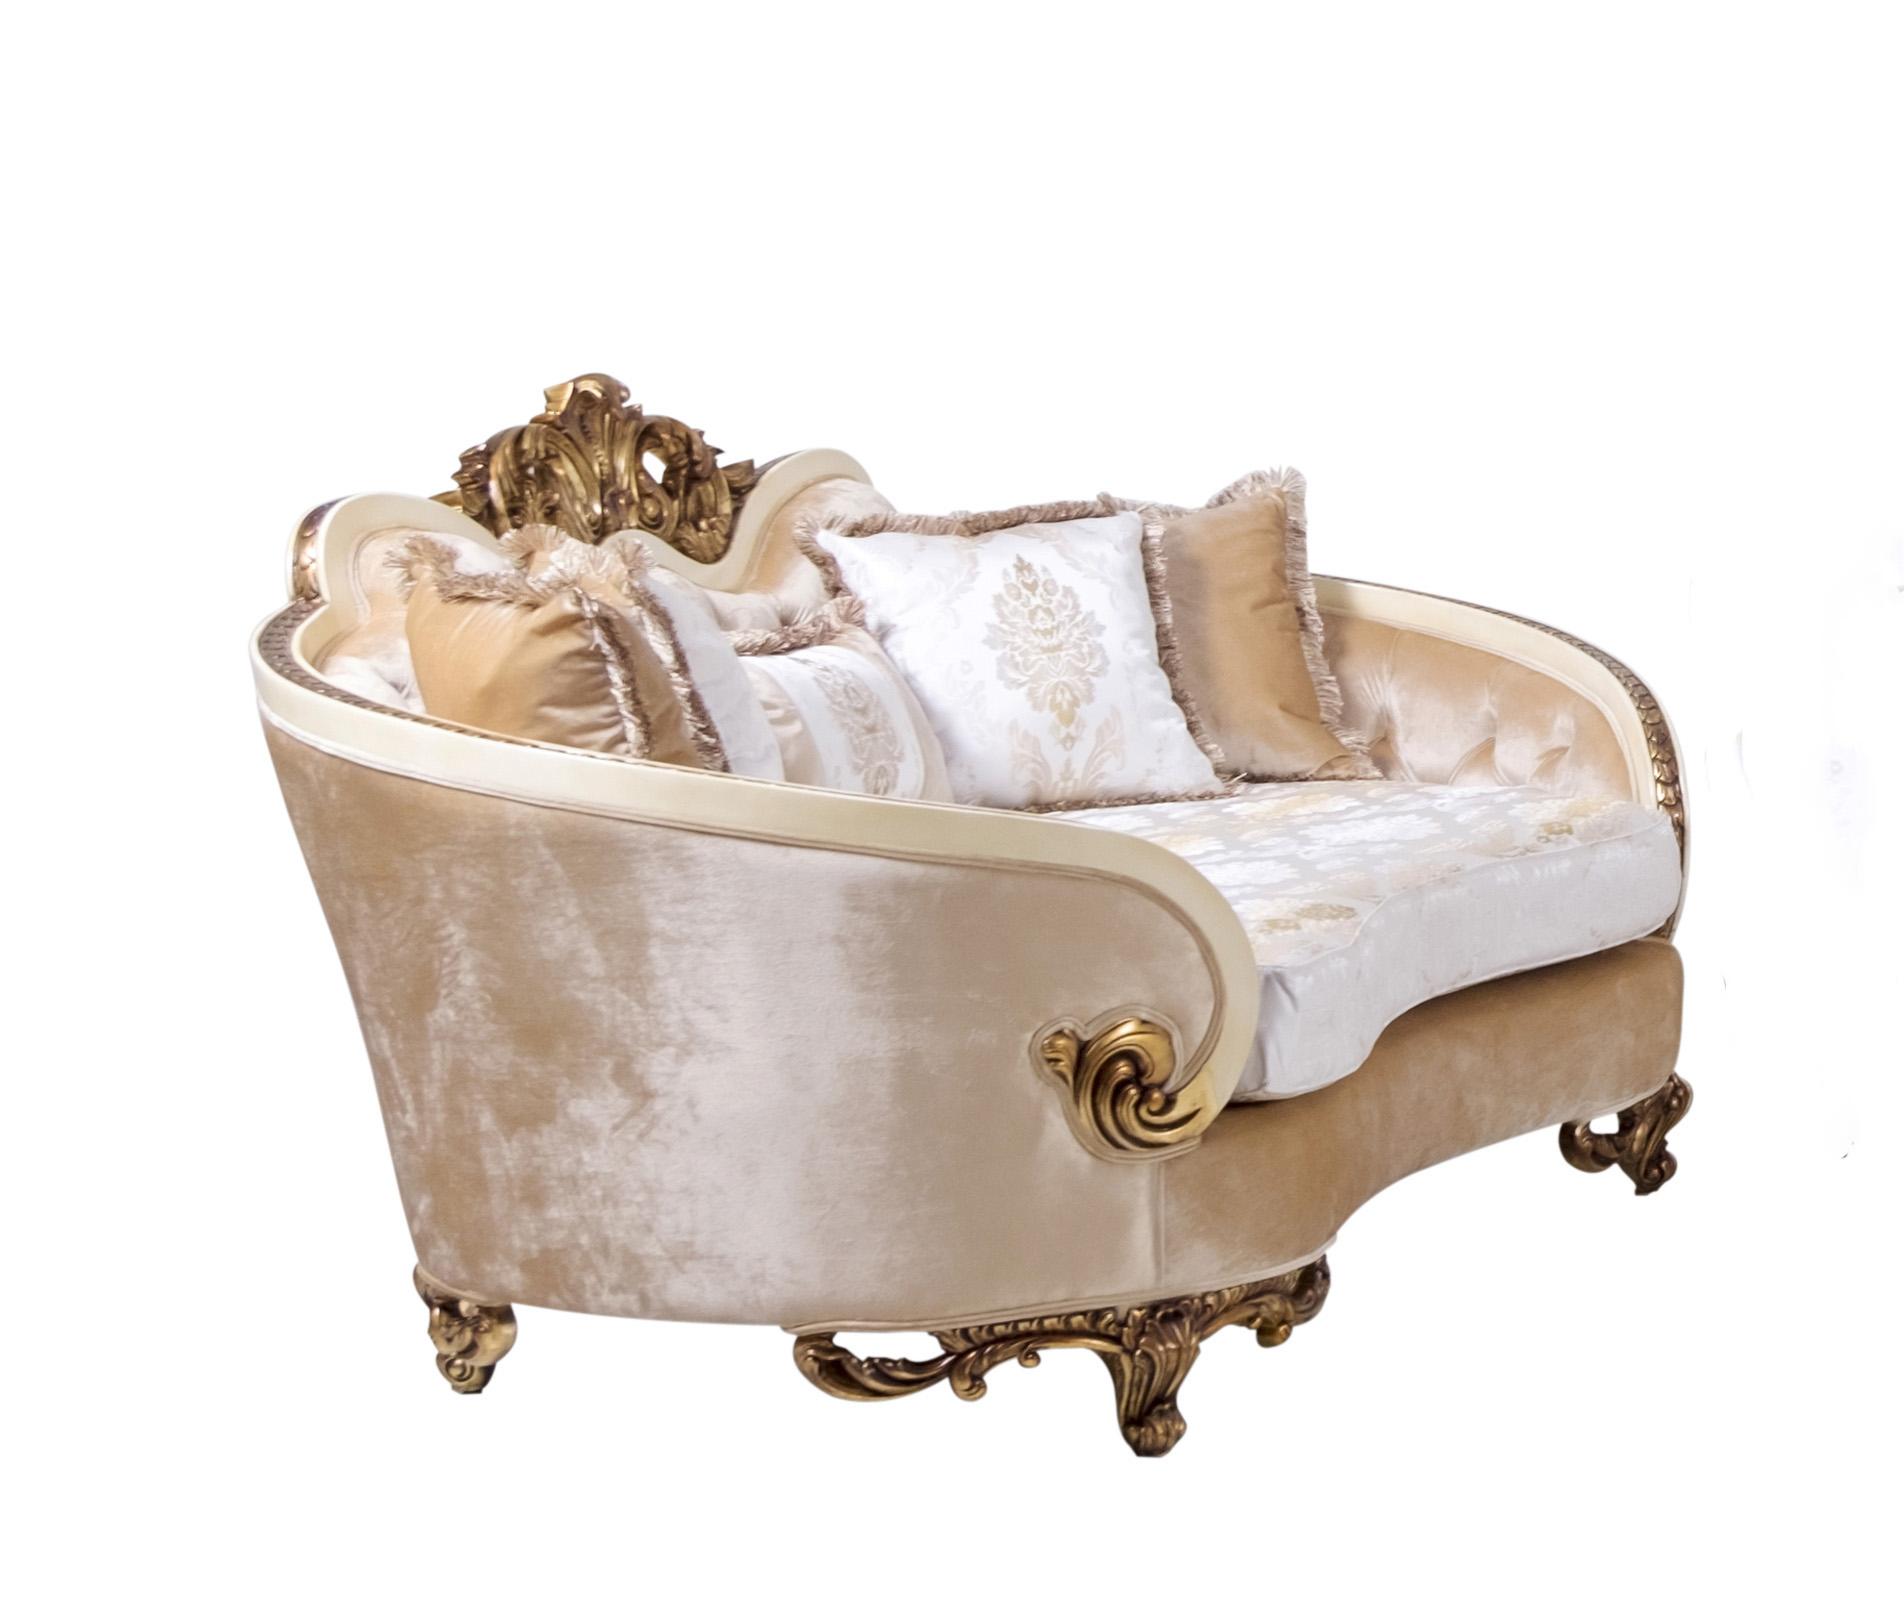 Classic, Traditional Loveseat ROSABELLA 36031-L in Antique, Gold, Beige Fabric